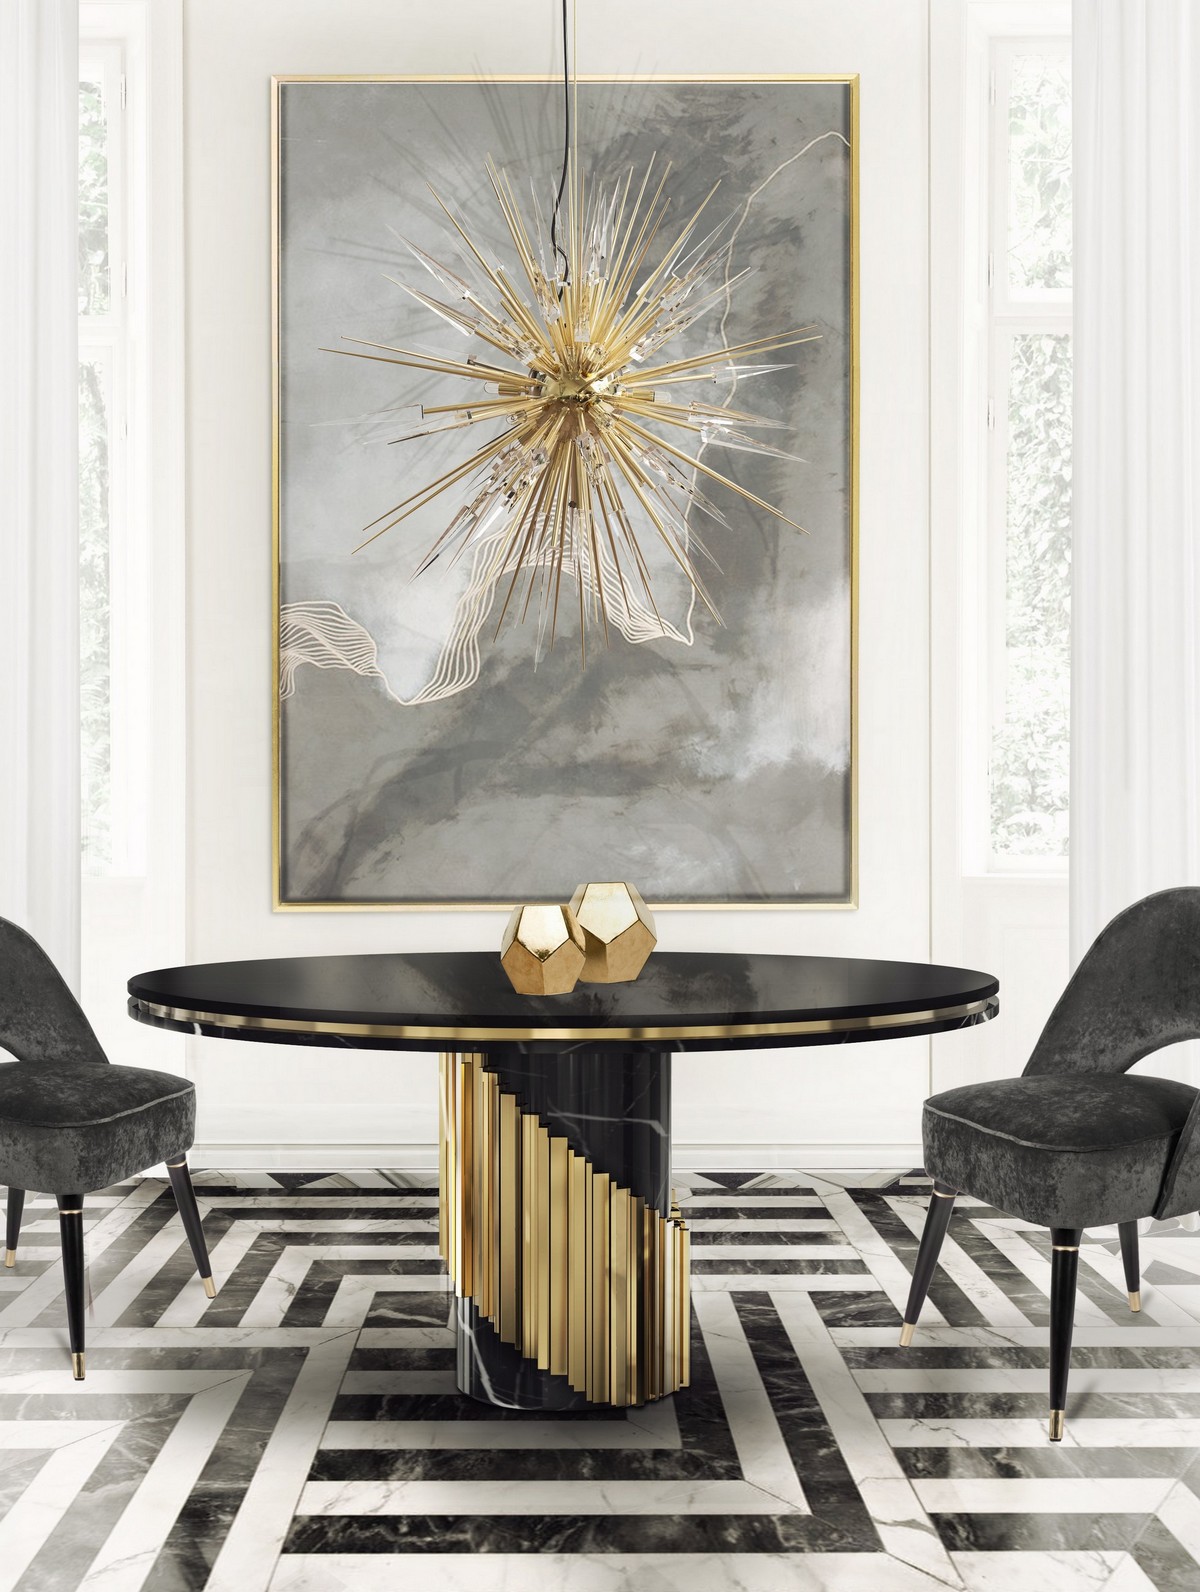 Artistic Dining Table Ideas For An Exquisite Dining Room Decor